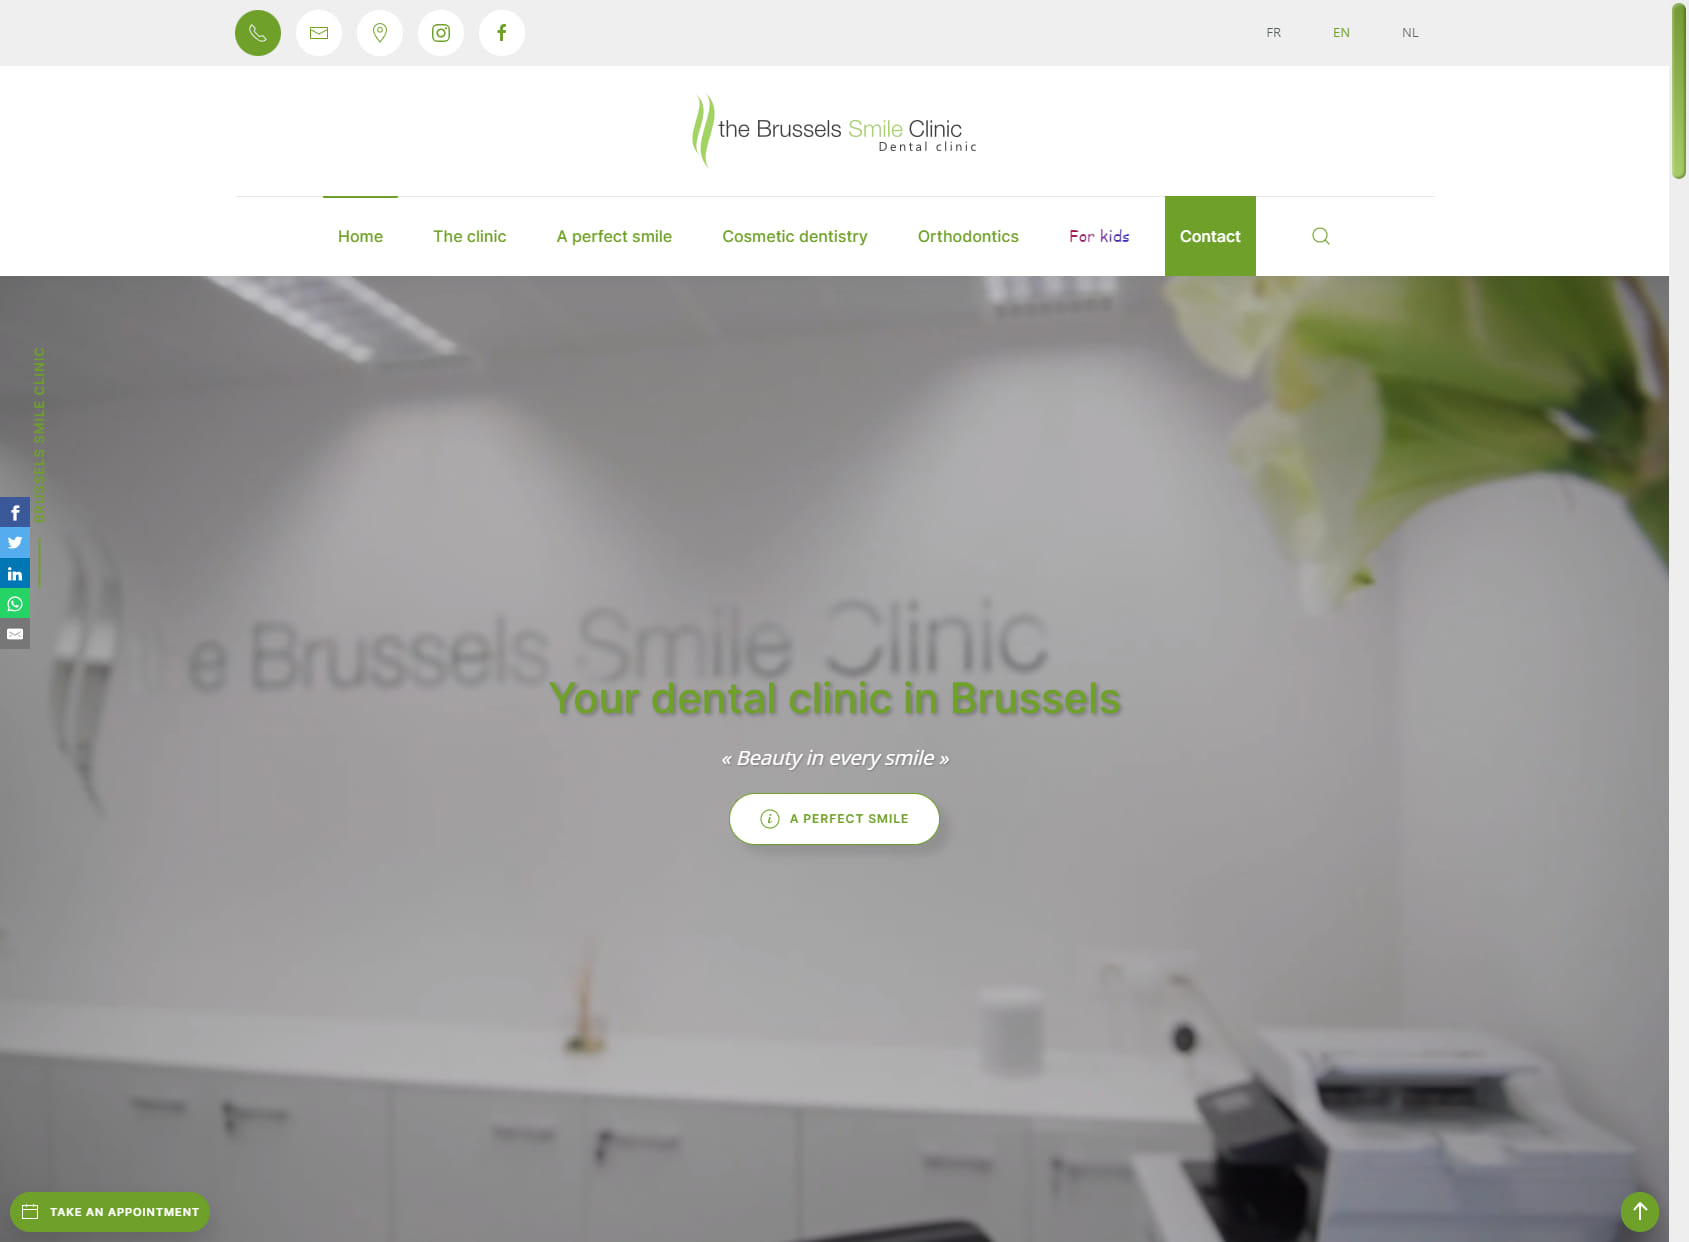 The Brussels Smile Clinic